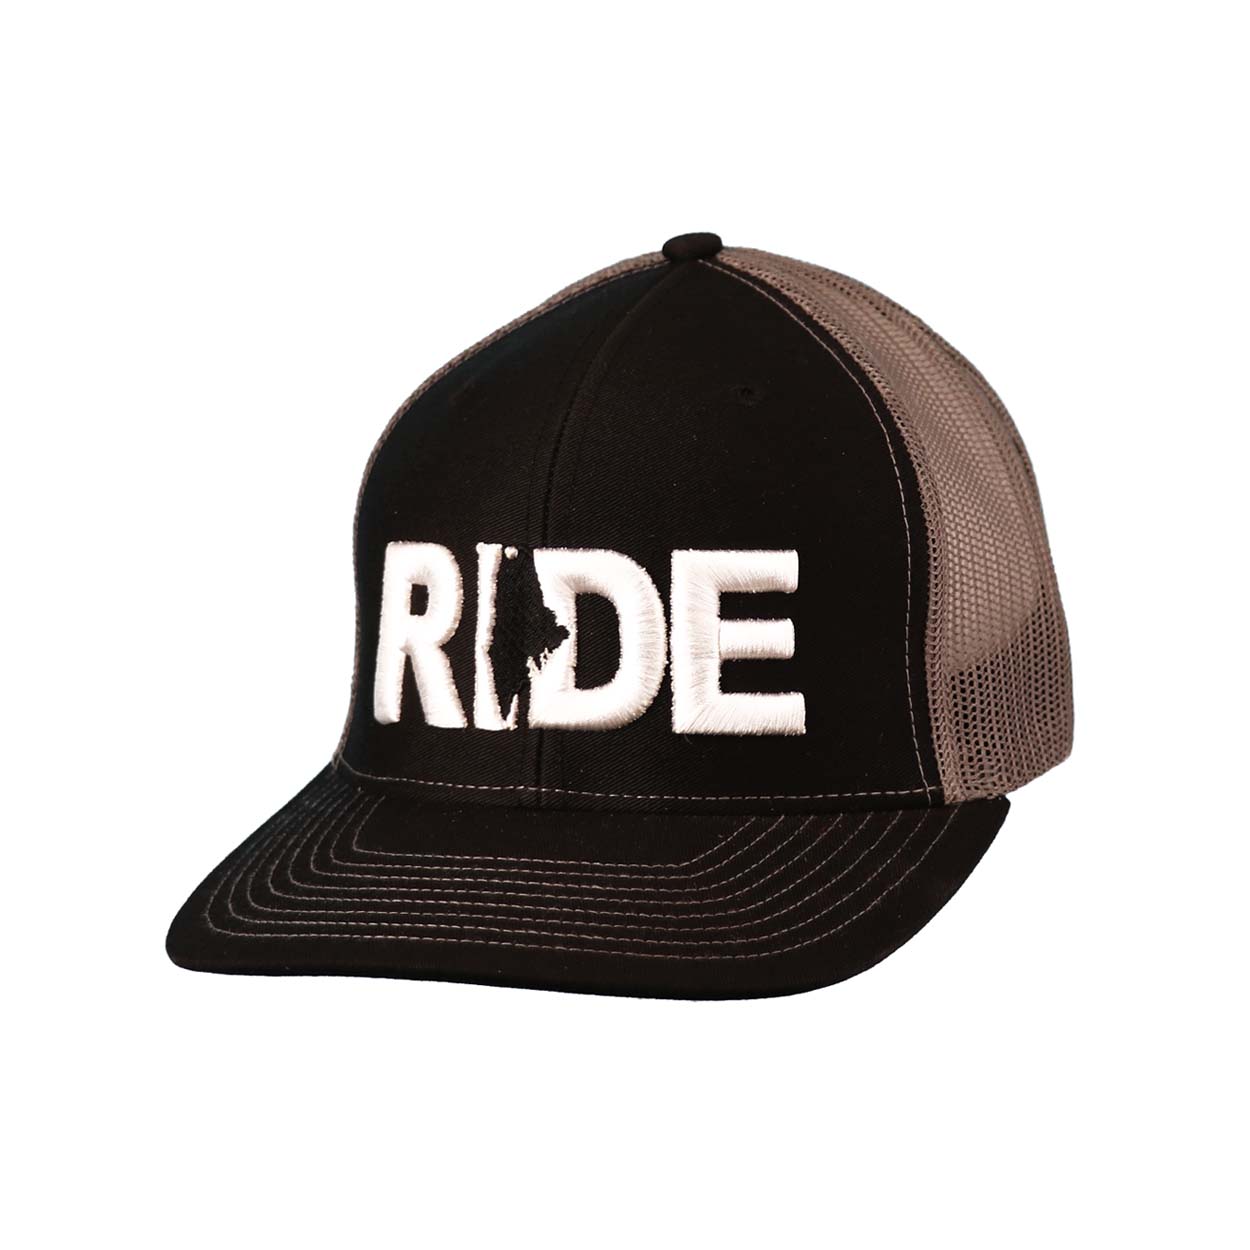 Ride Maine Classic Embroidered Snapback Trucker Hat Black/Gray